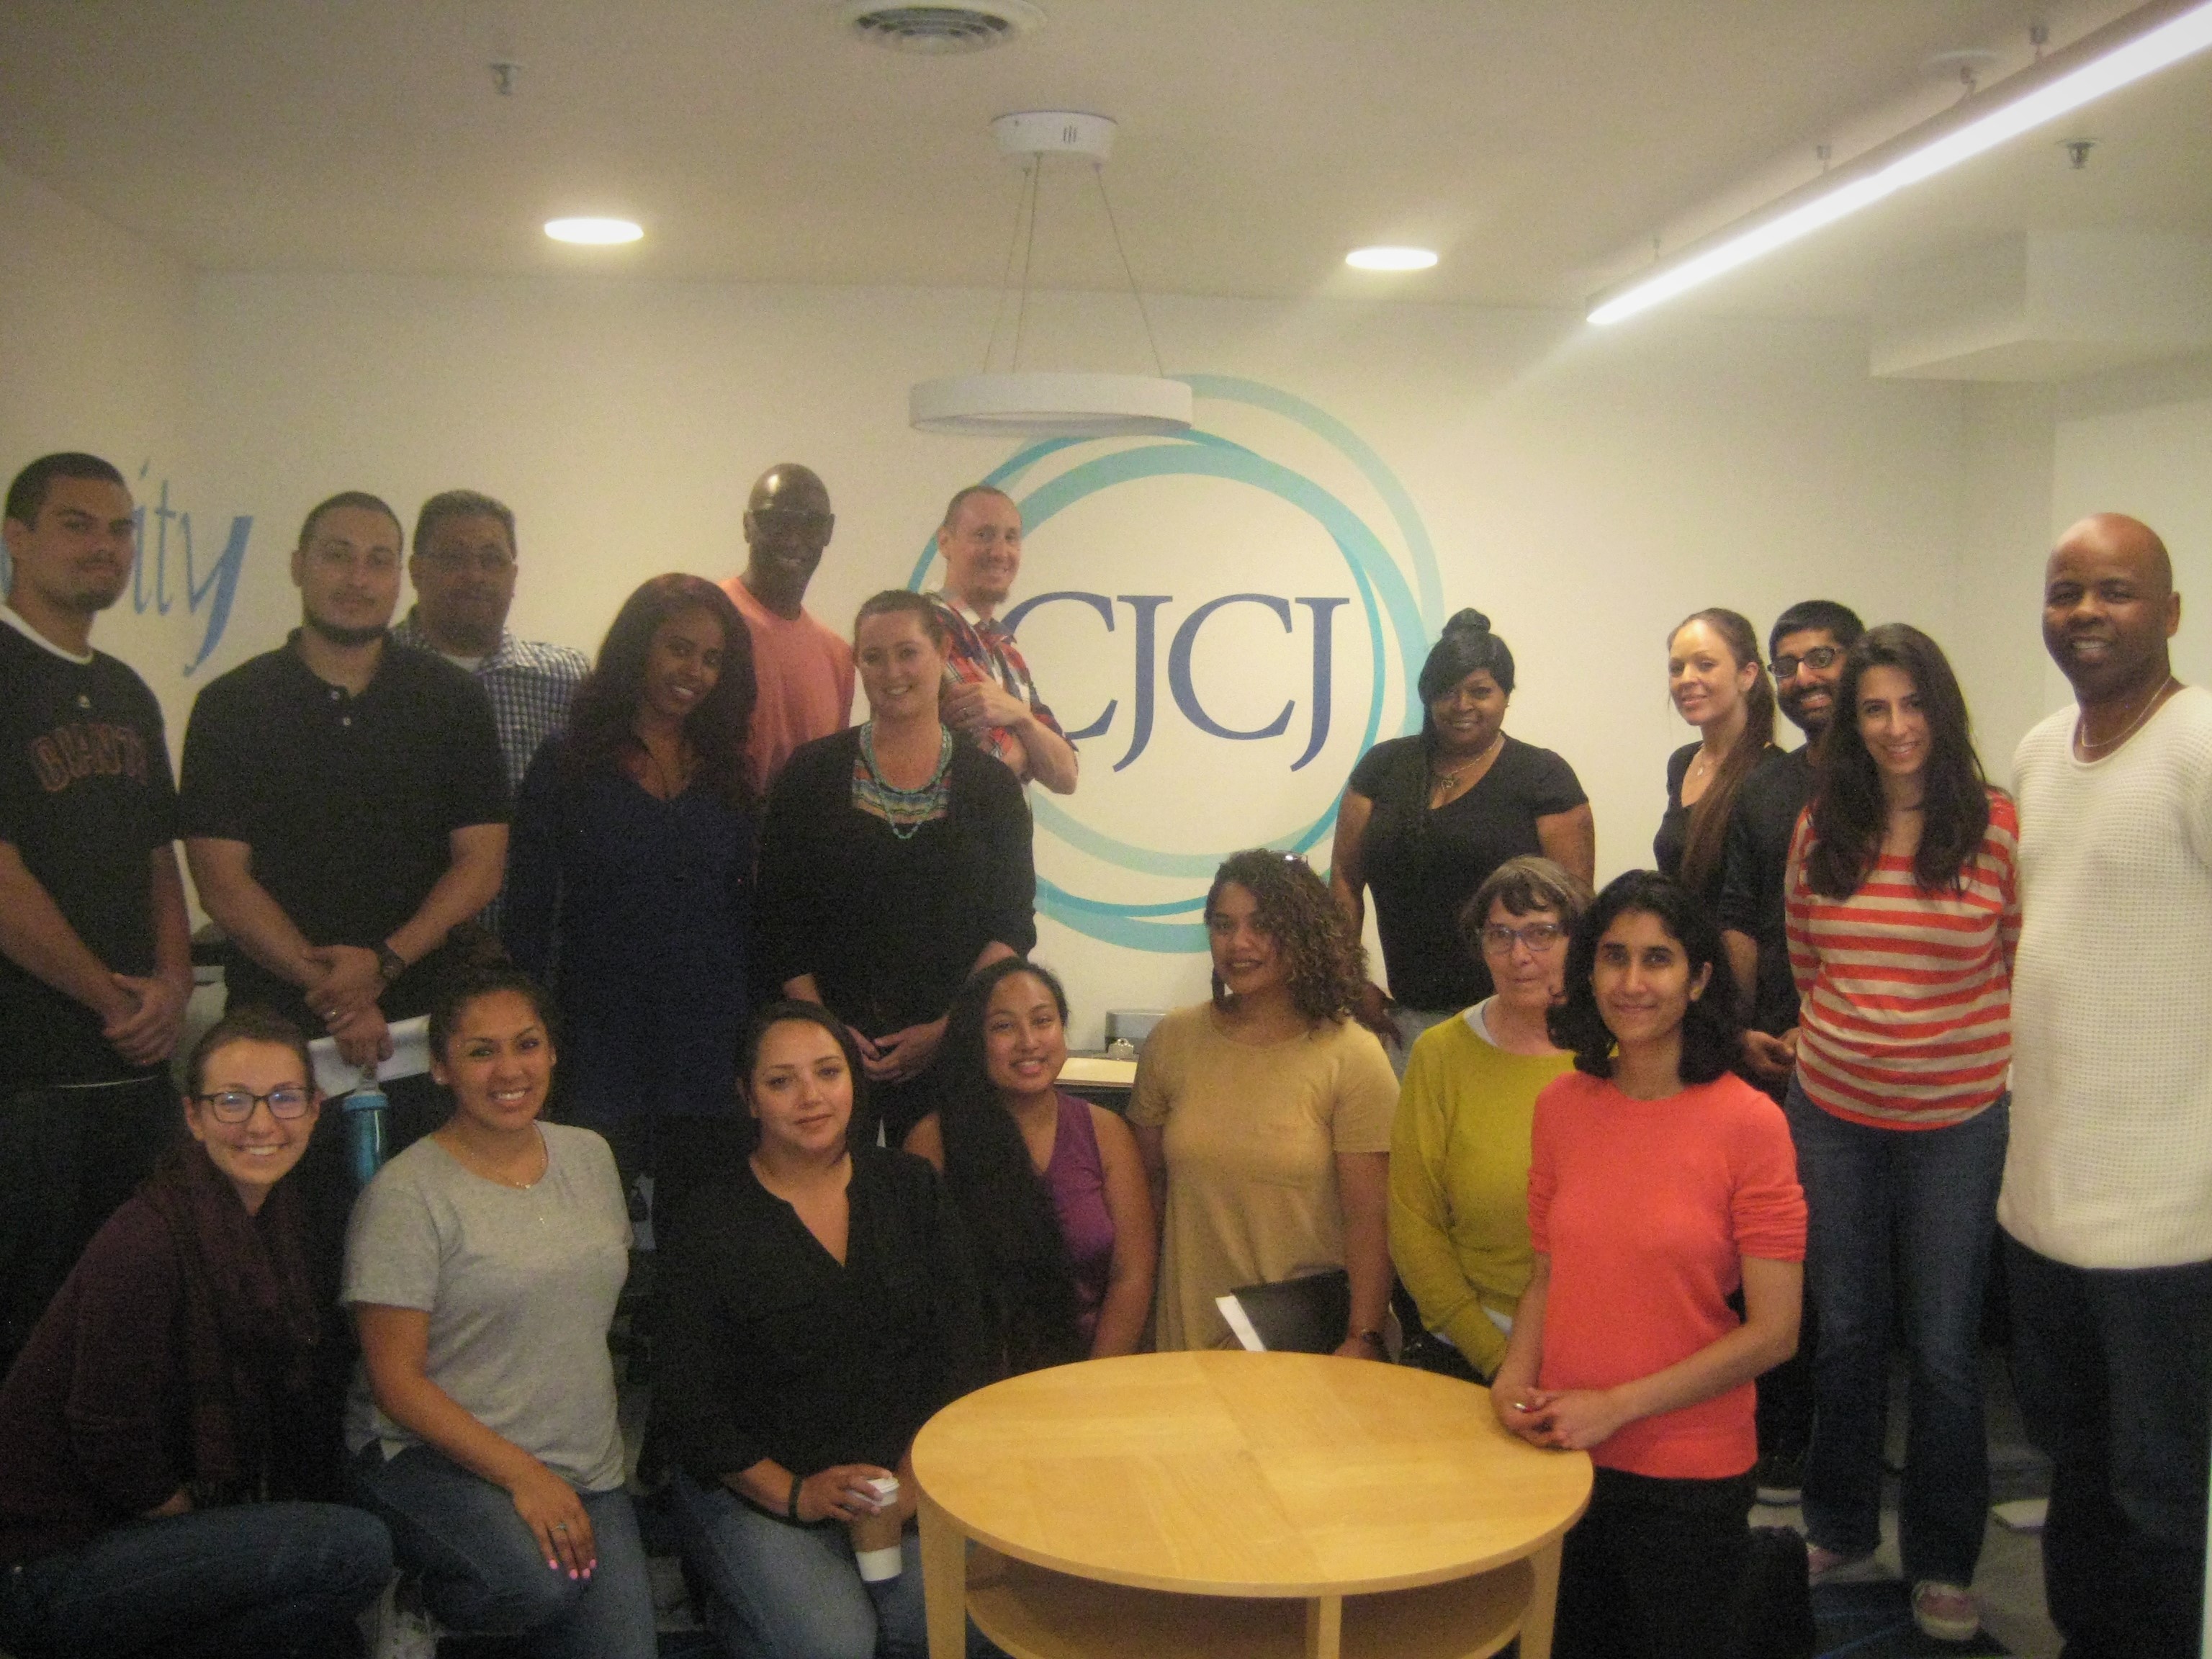 CJCJ staff members gather together in the new office space for the first time!